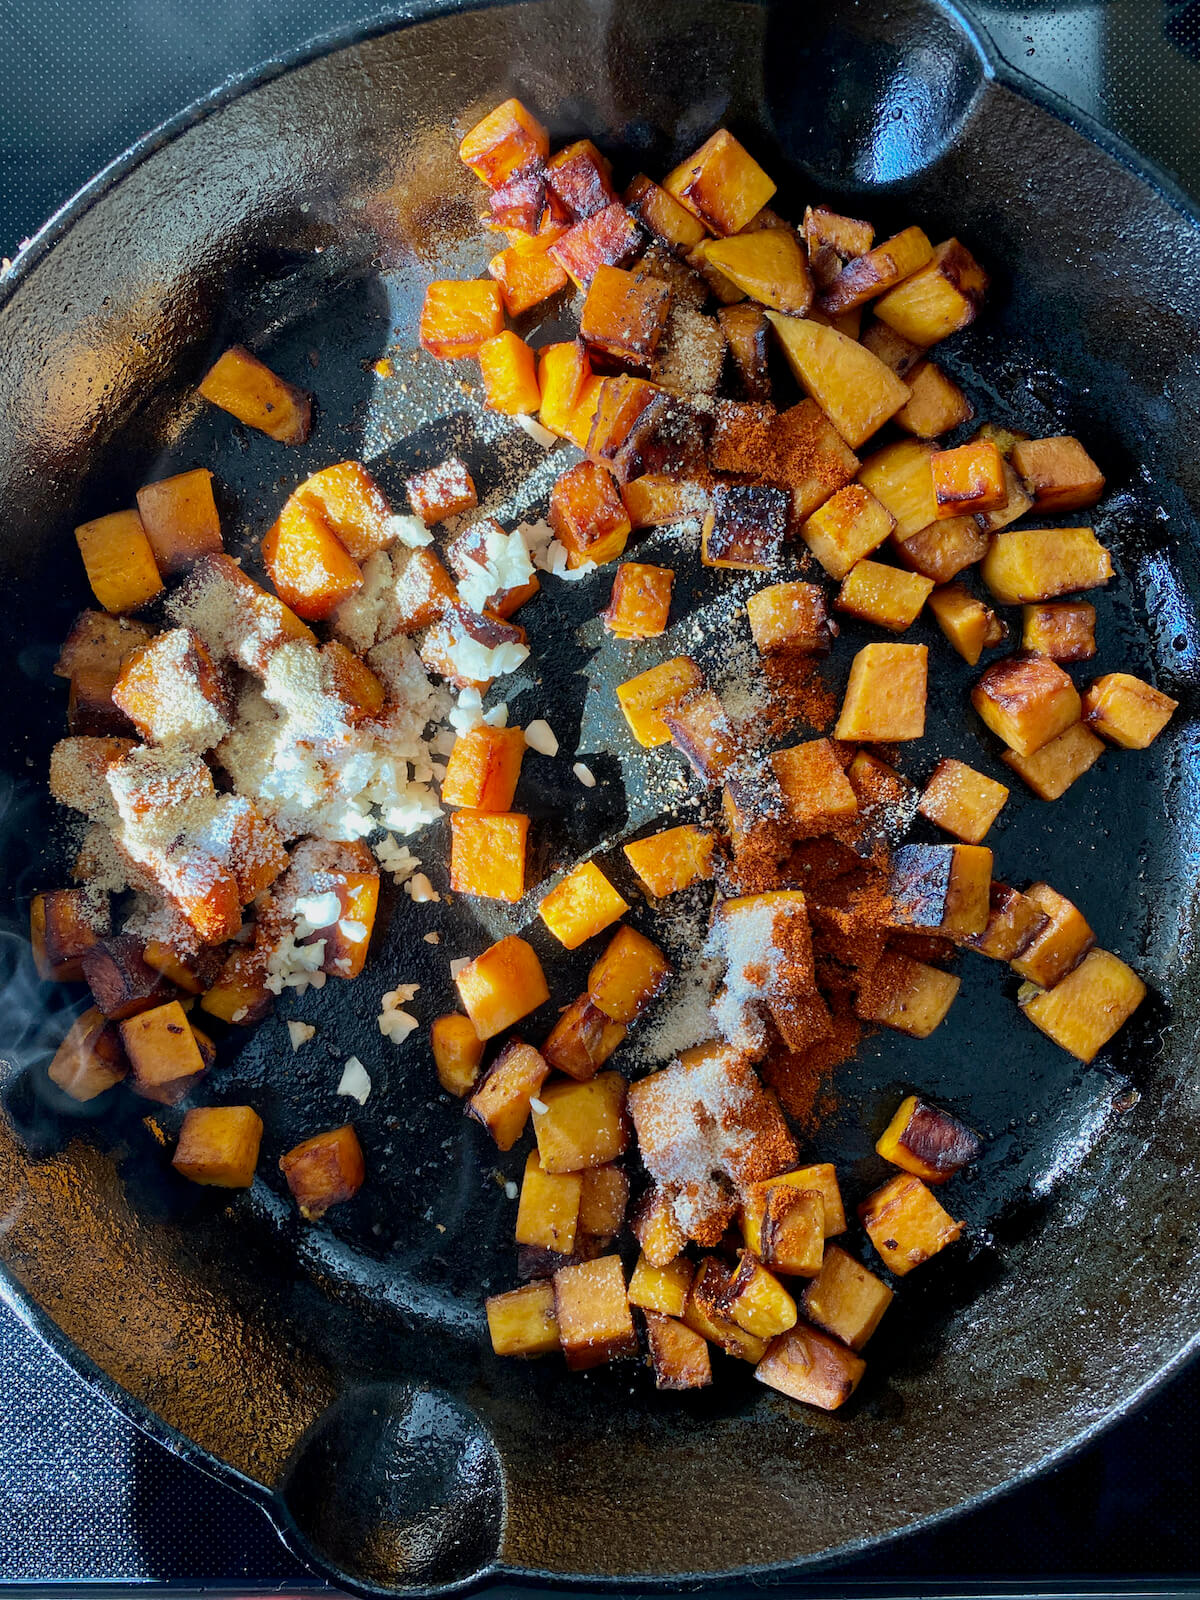 Cooked sweet potatoes in a cast iron skillet with seasonings sprinkled over the top of them.